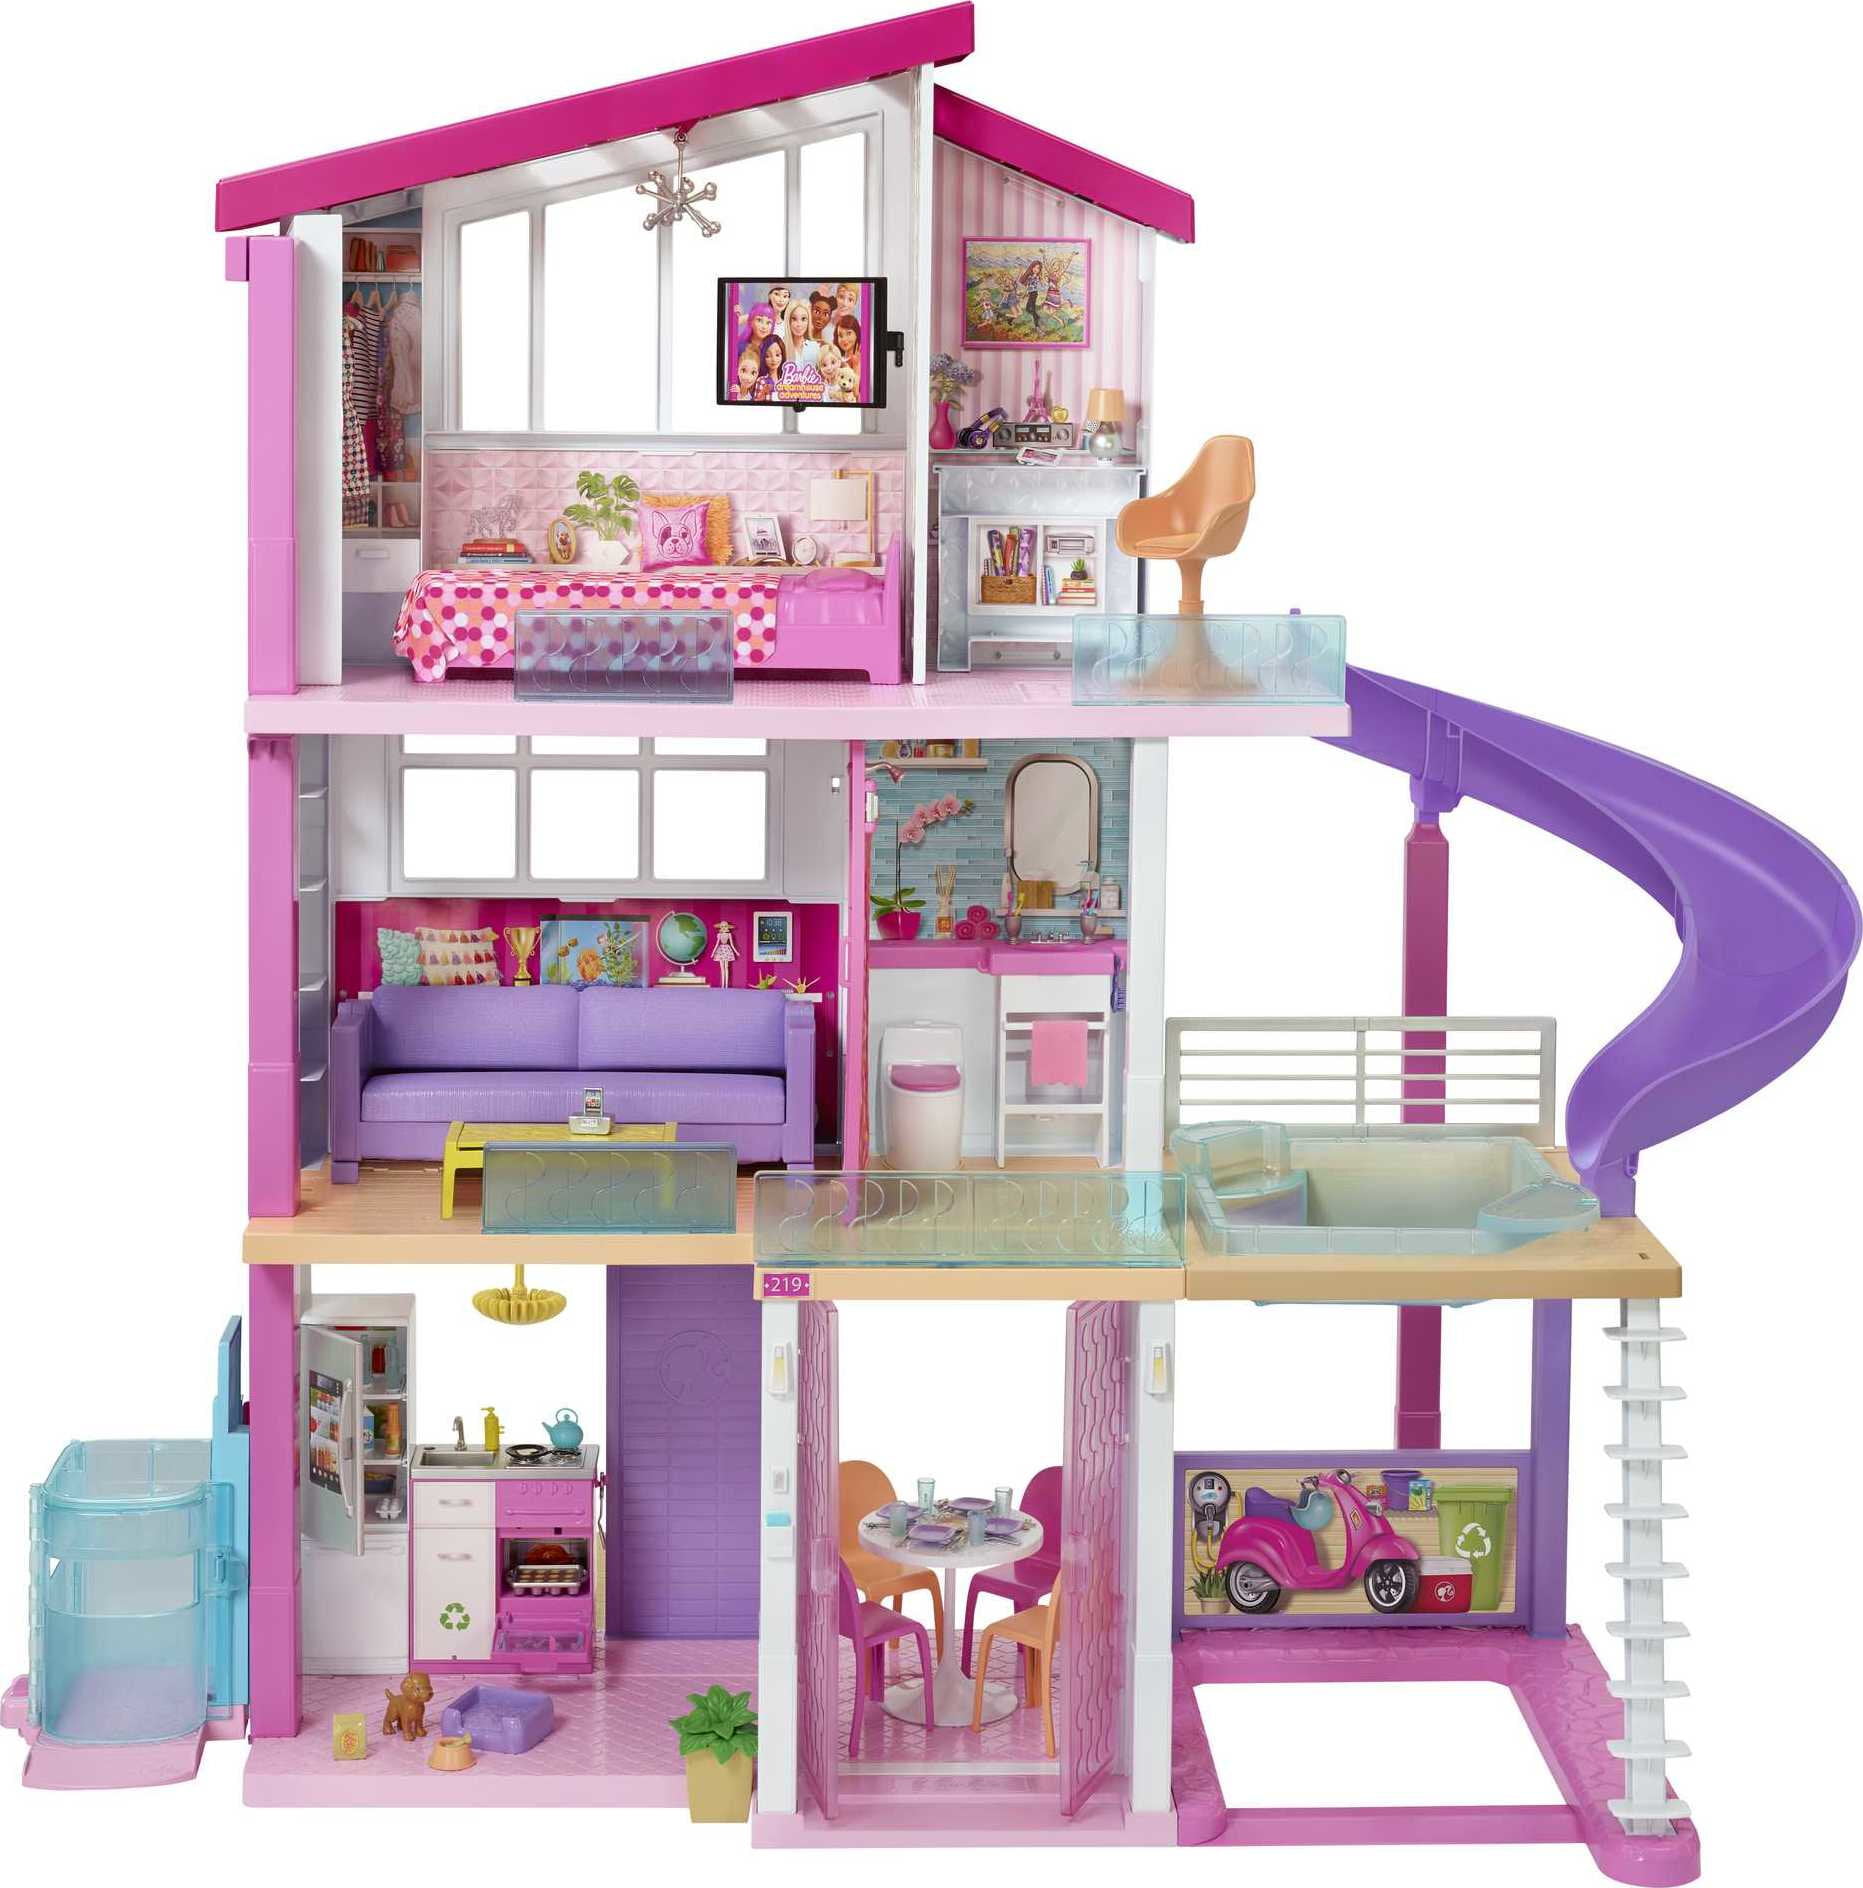 A doll house and FP popcorn popper toy for gifts Ginny's birthday party 